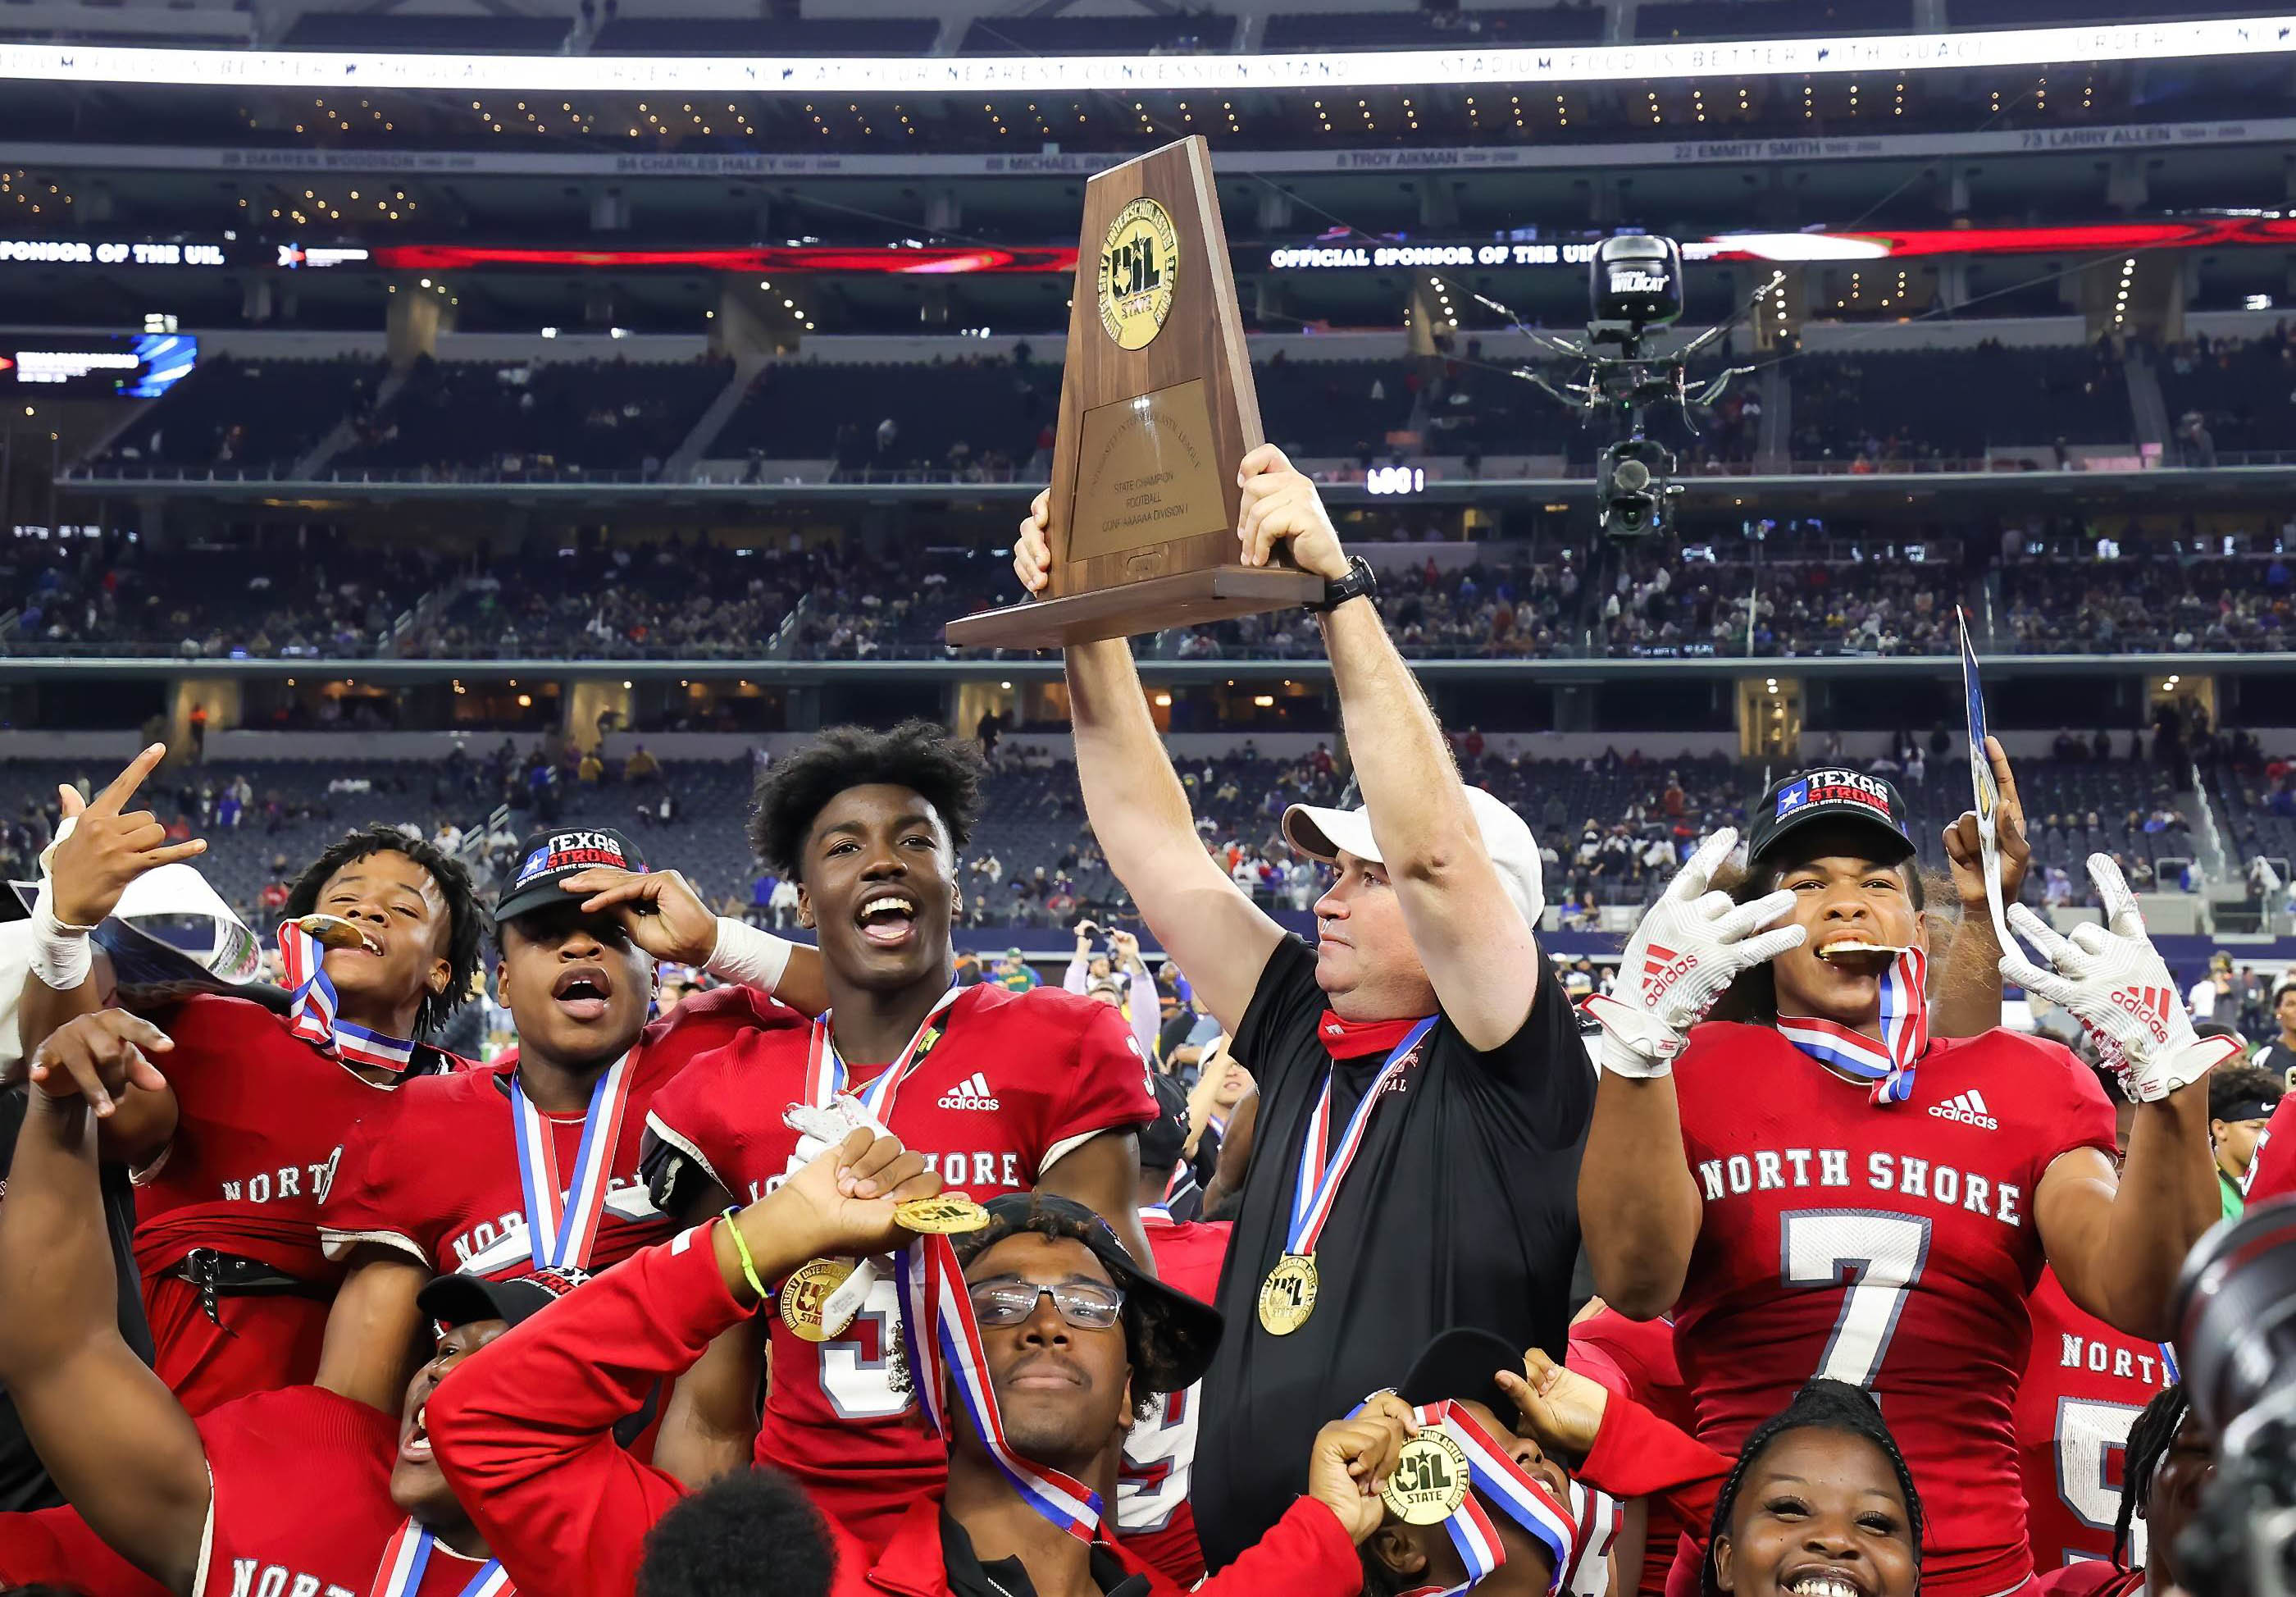 North Shore seeks its fourth 6A title in five years.